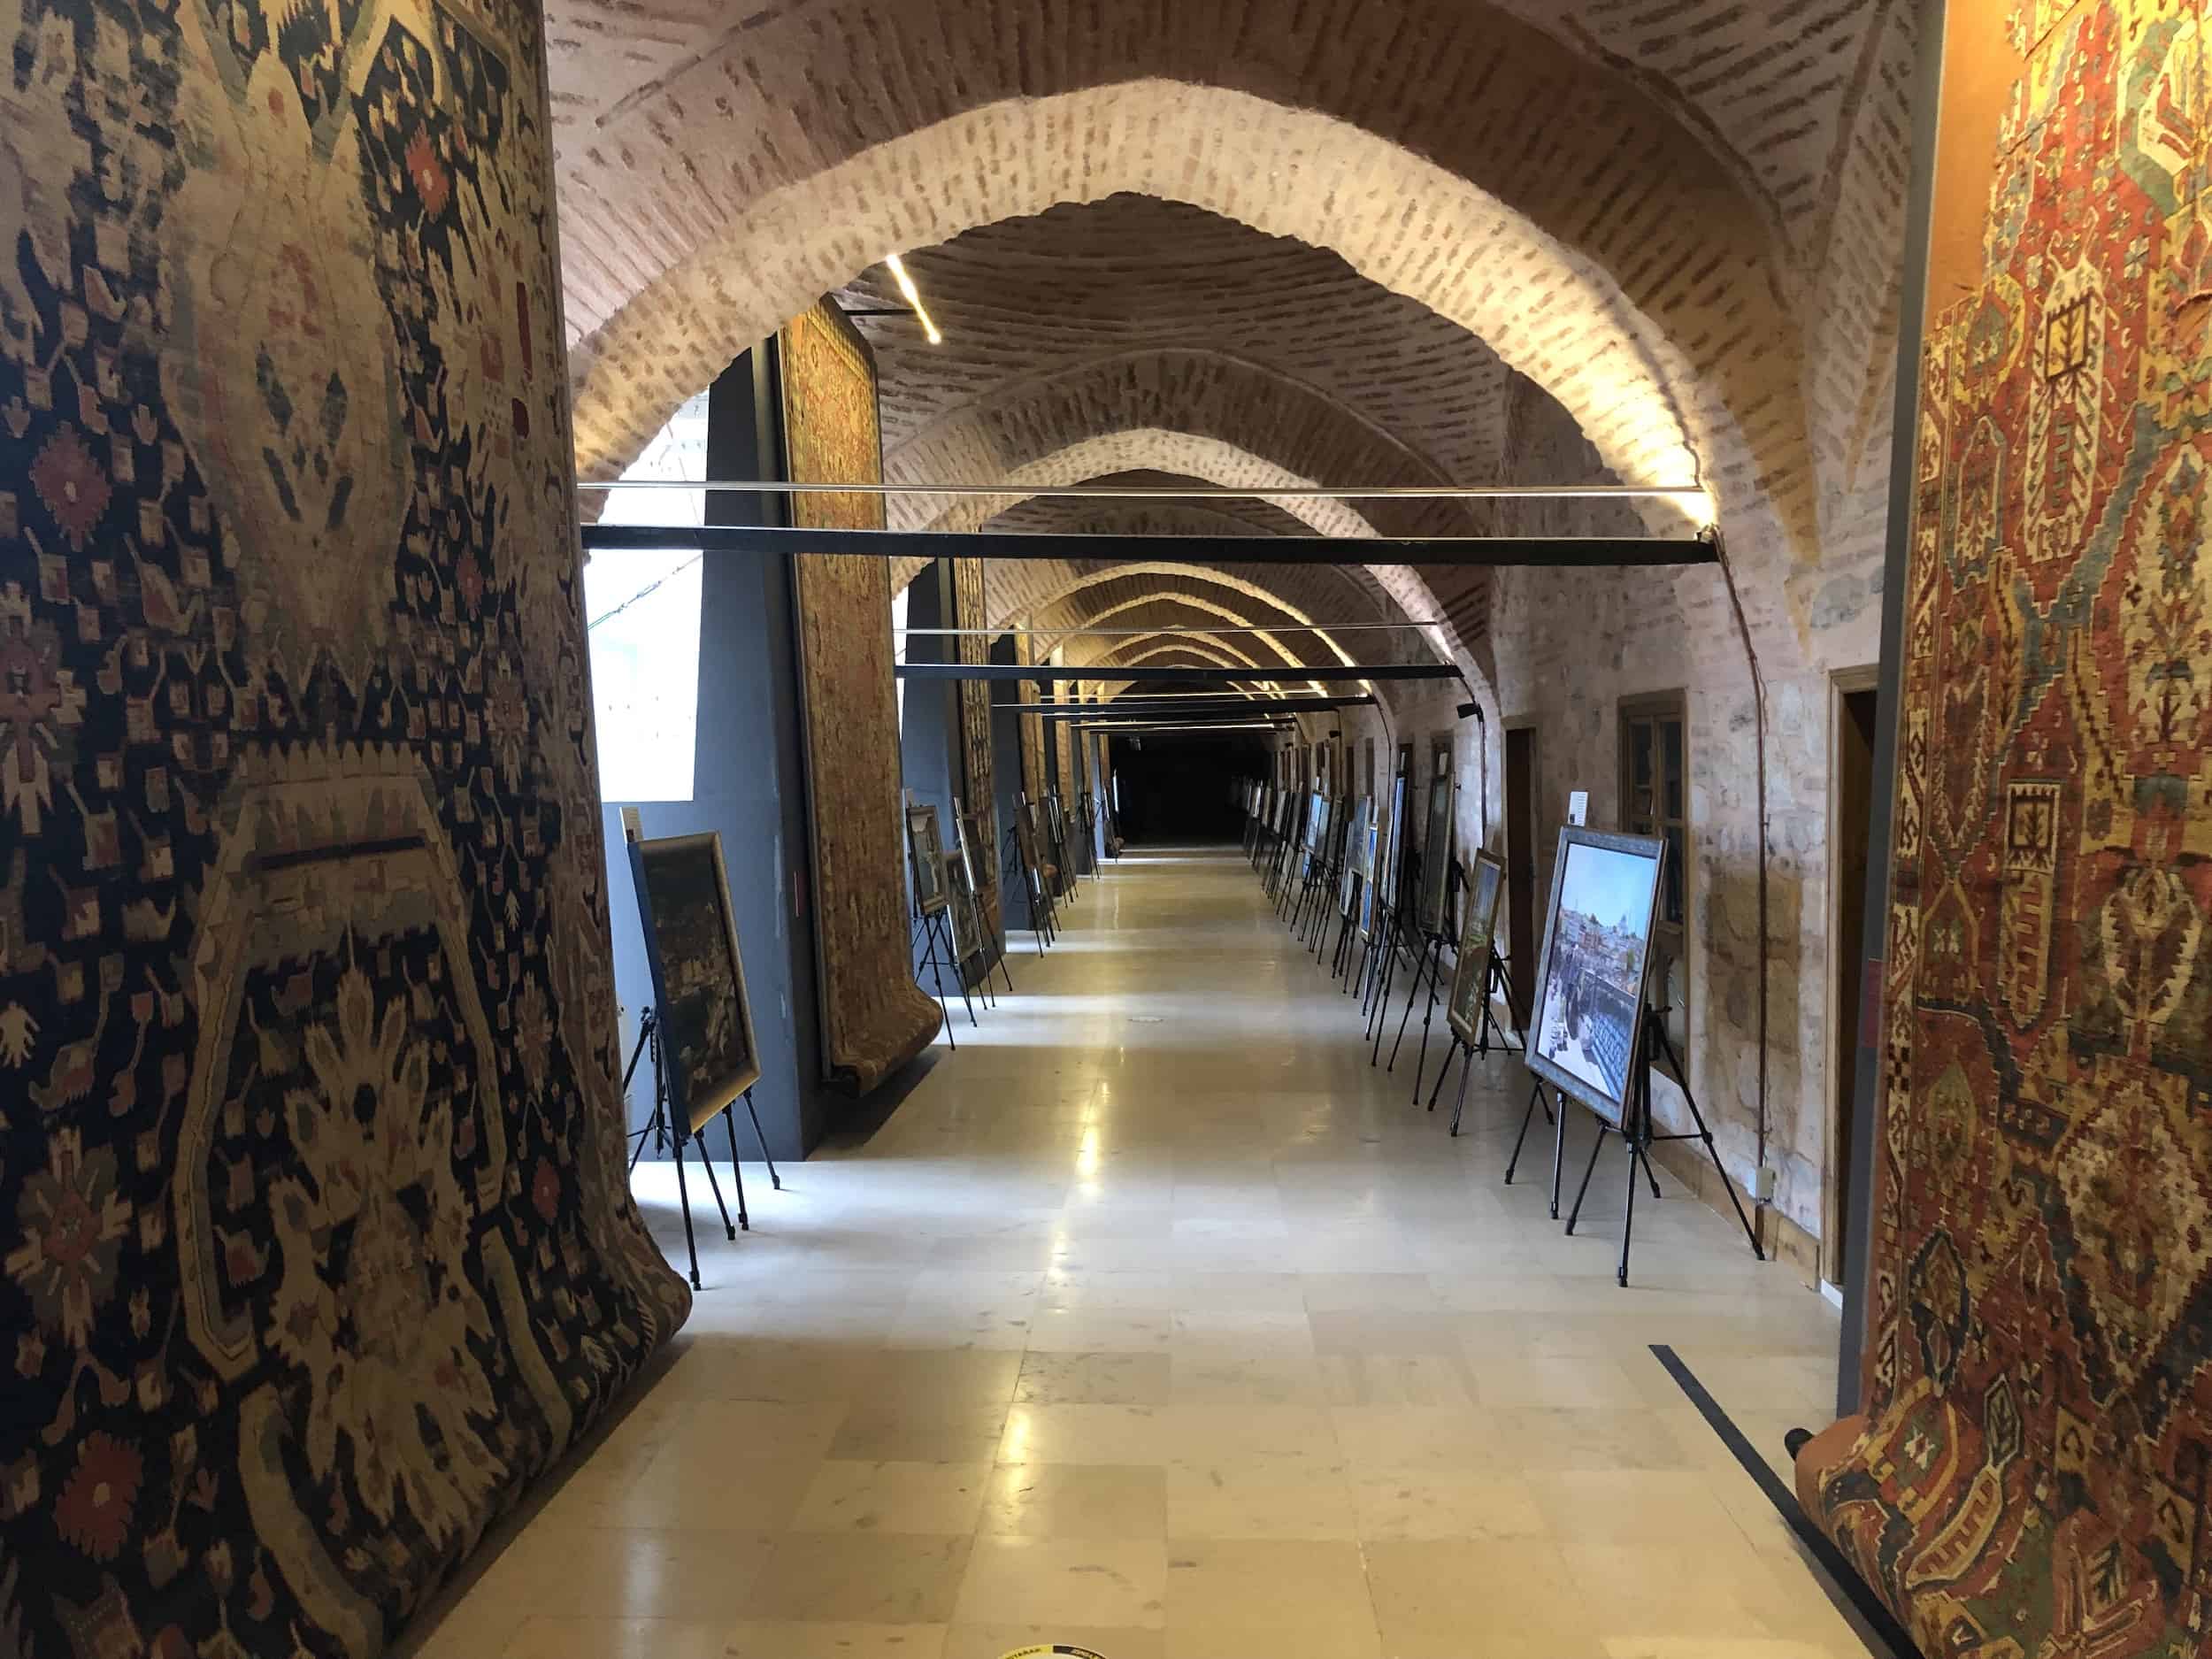 Corridor at the Museum of Turkish and Islamic Arts in Istanbul, Turkey